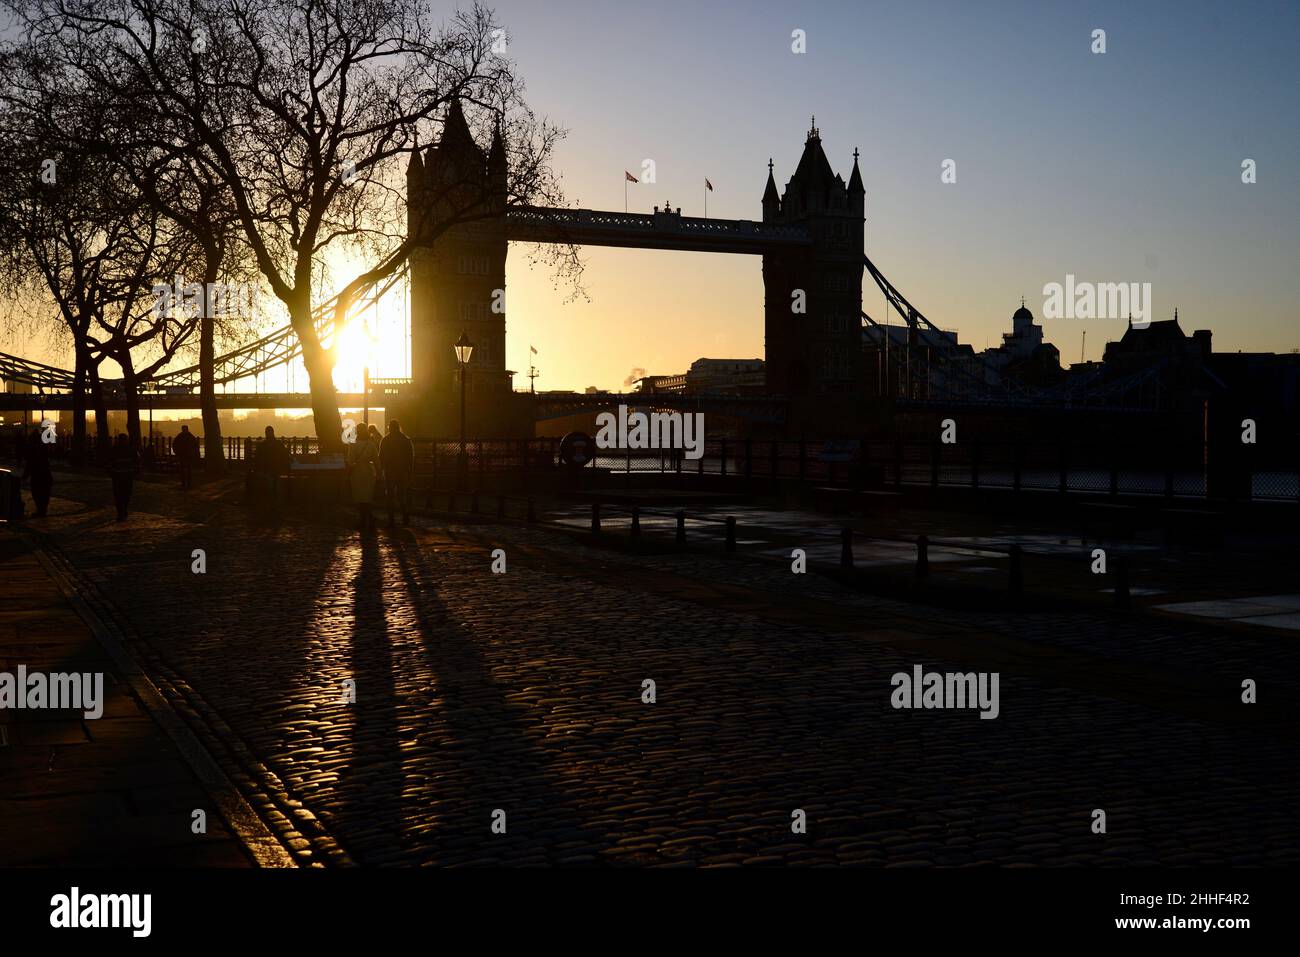 Sunrise over Tower Bridge from outside the Tower of London, England Stock Photo